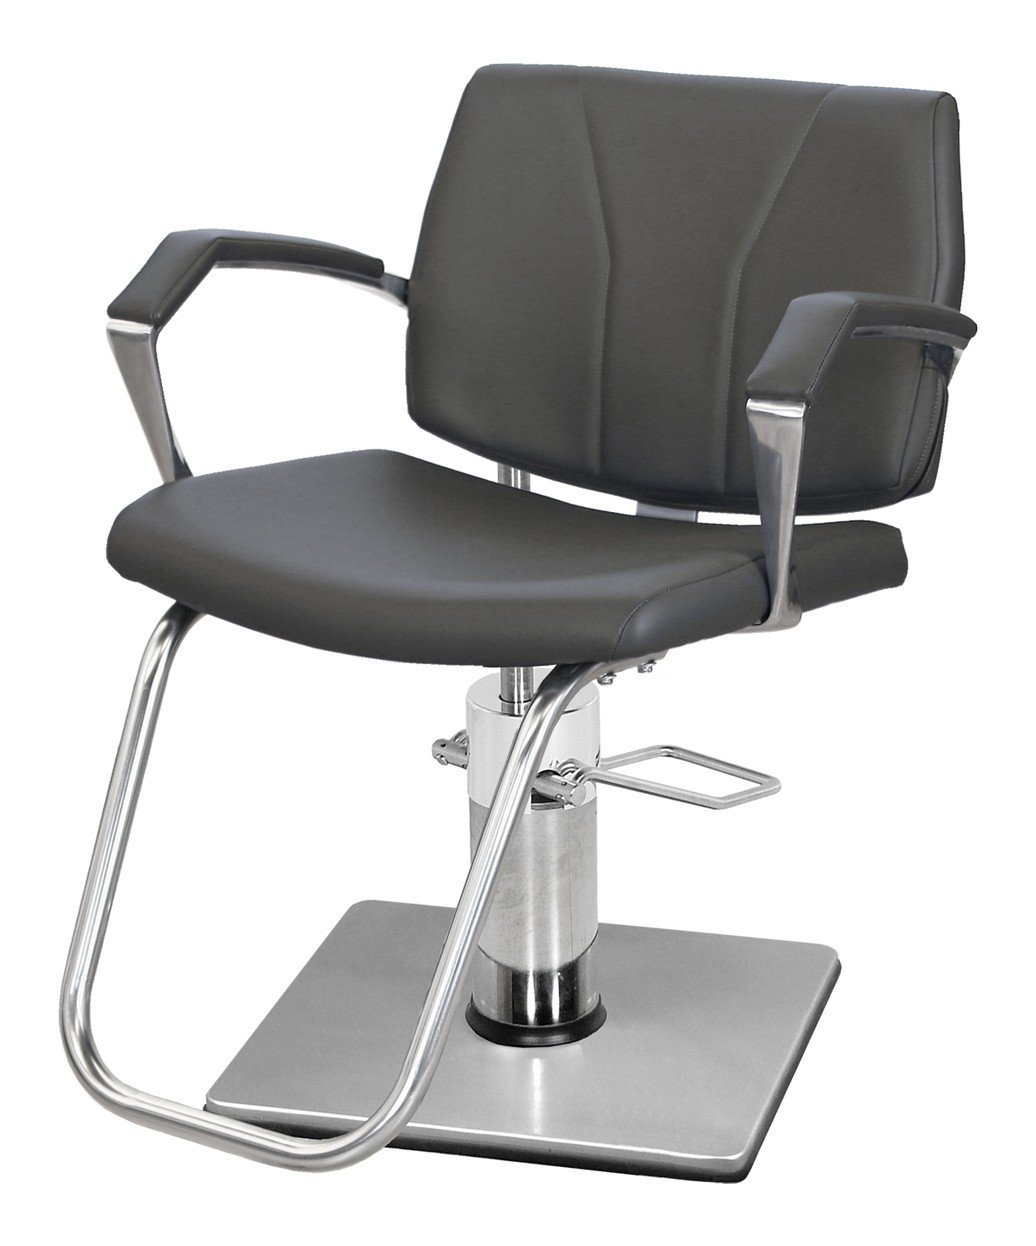 Collins 5200 Phenix Styling Chair